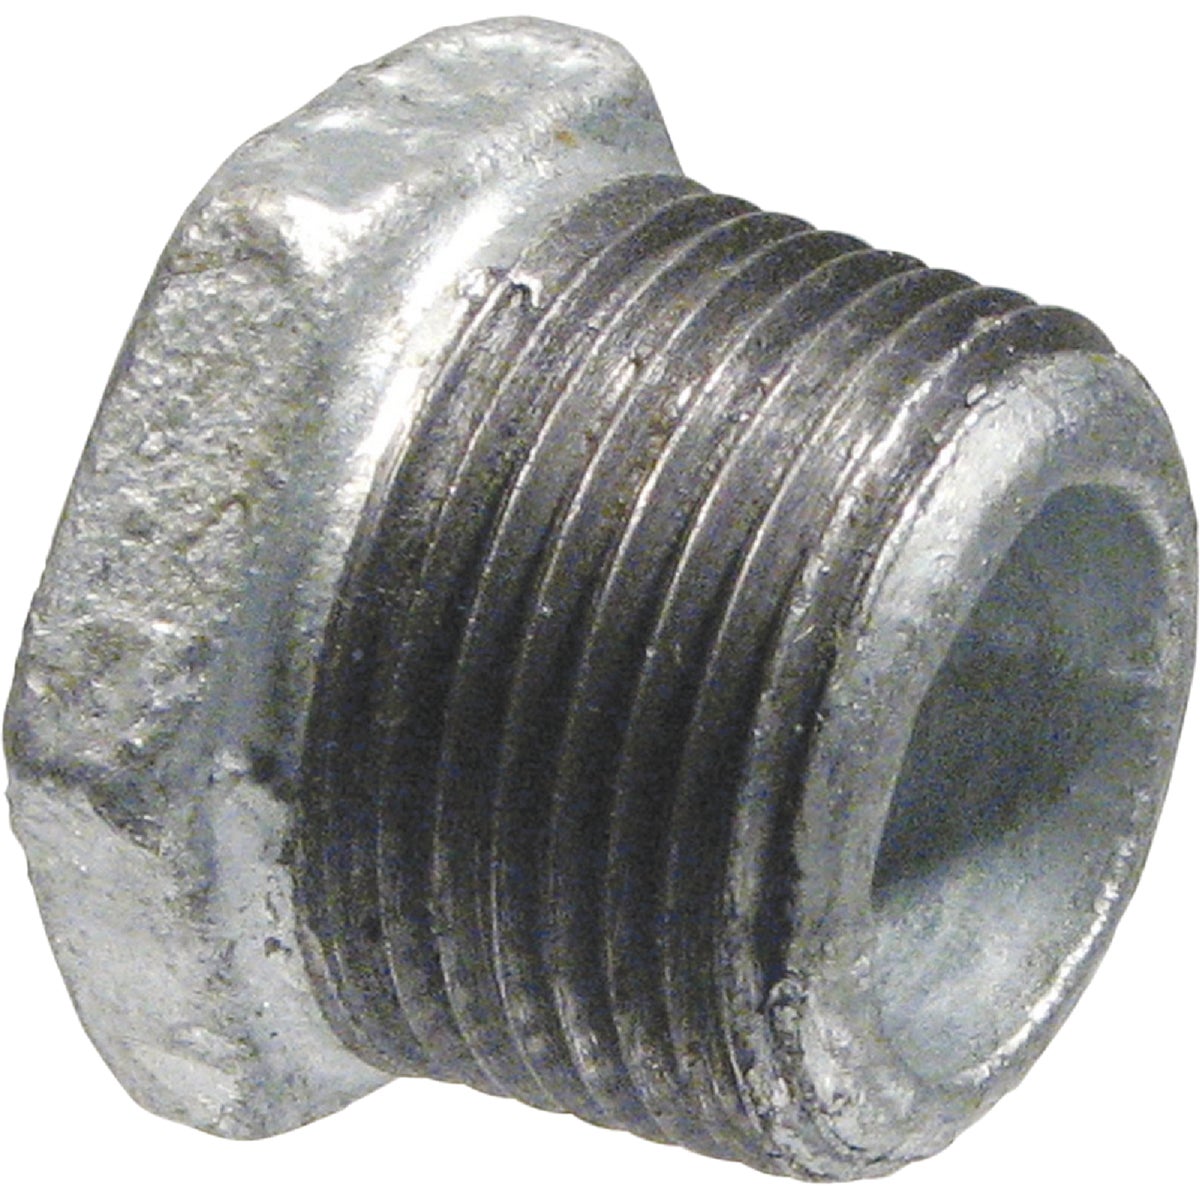 Southland 1/2 In. x 1/4 In. Hex Galvanized Bushing